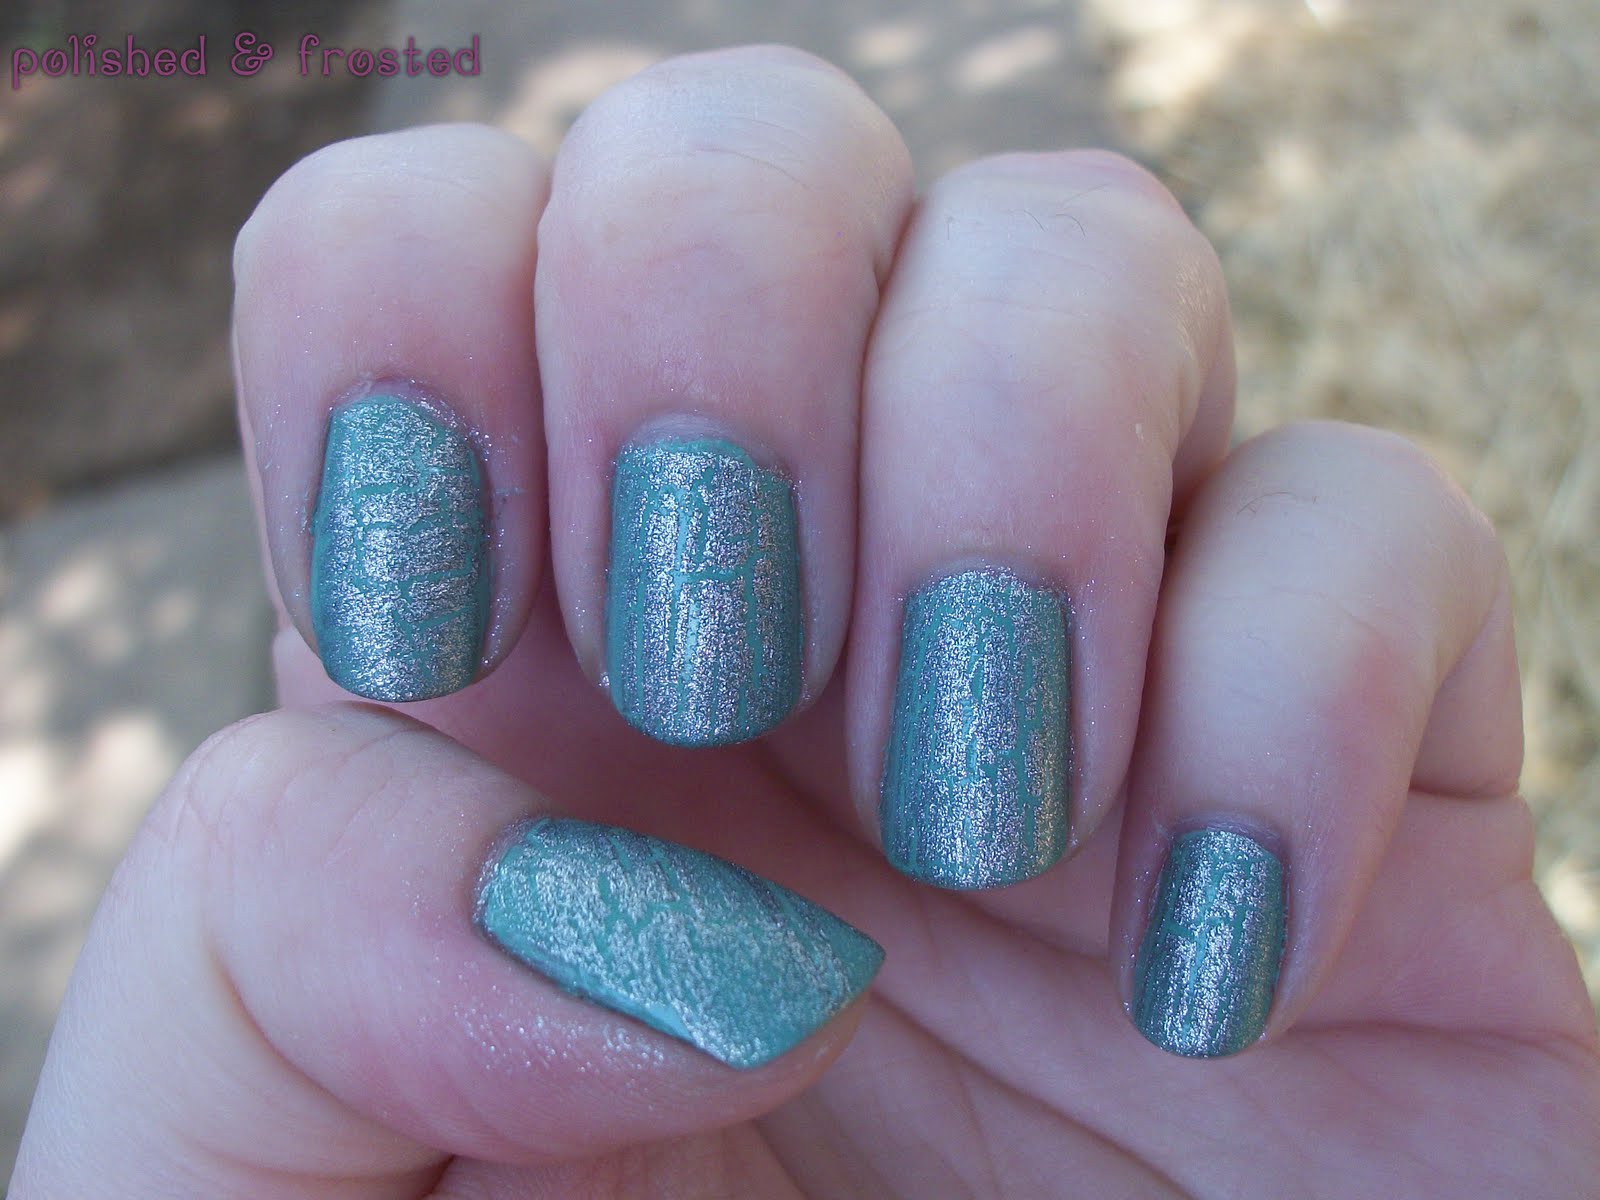 10. OPI Shatter Nail Polish in Silver Shatter - wide 7